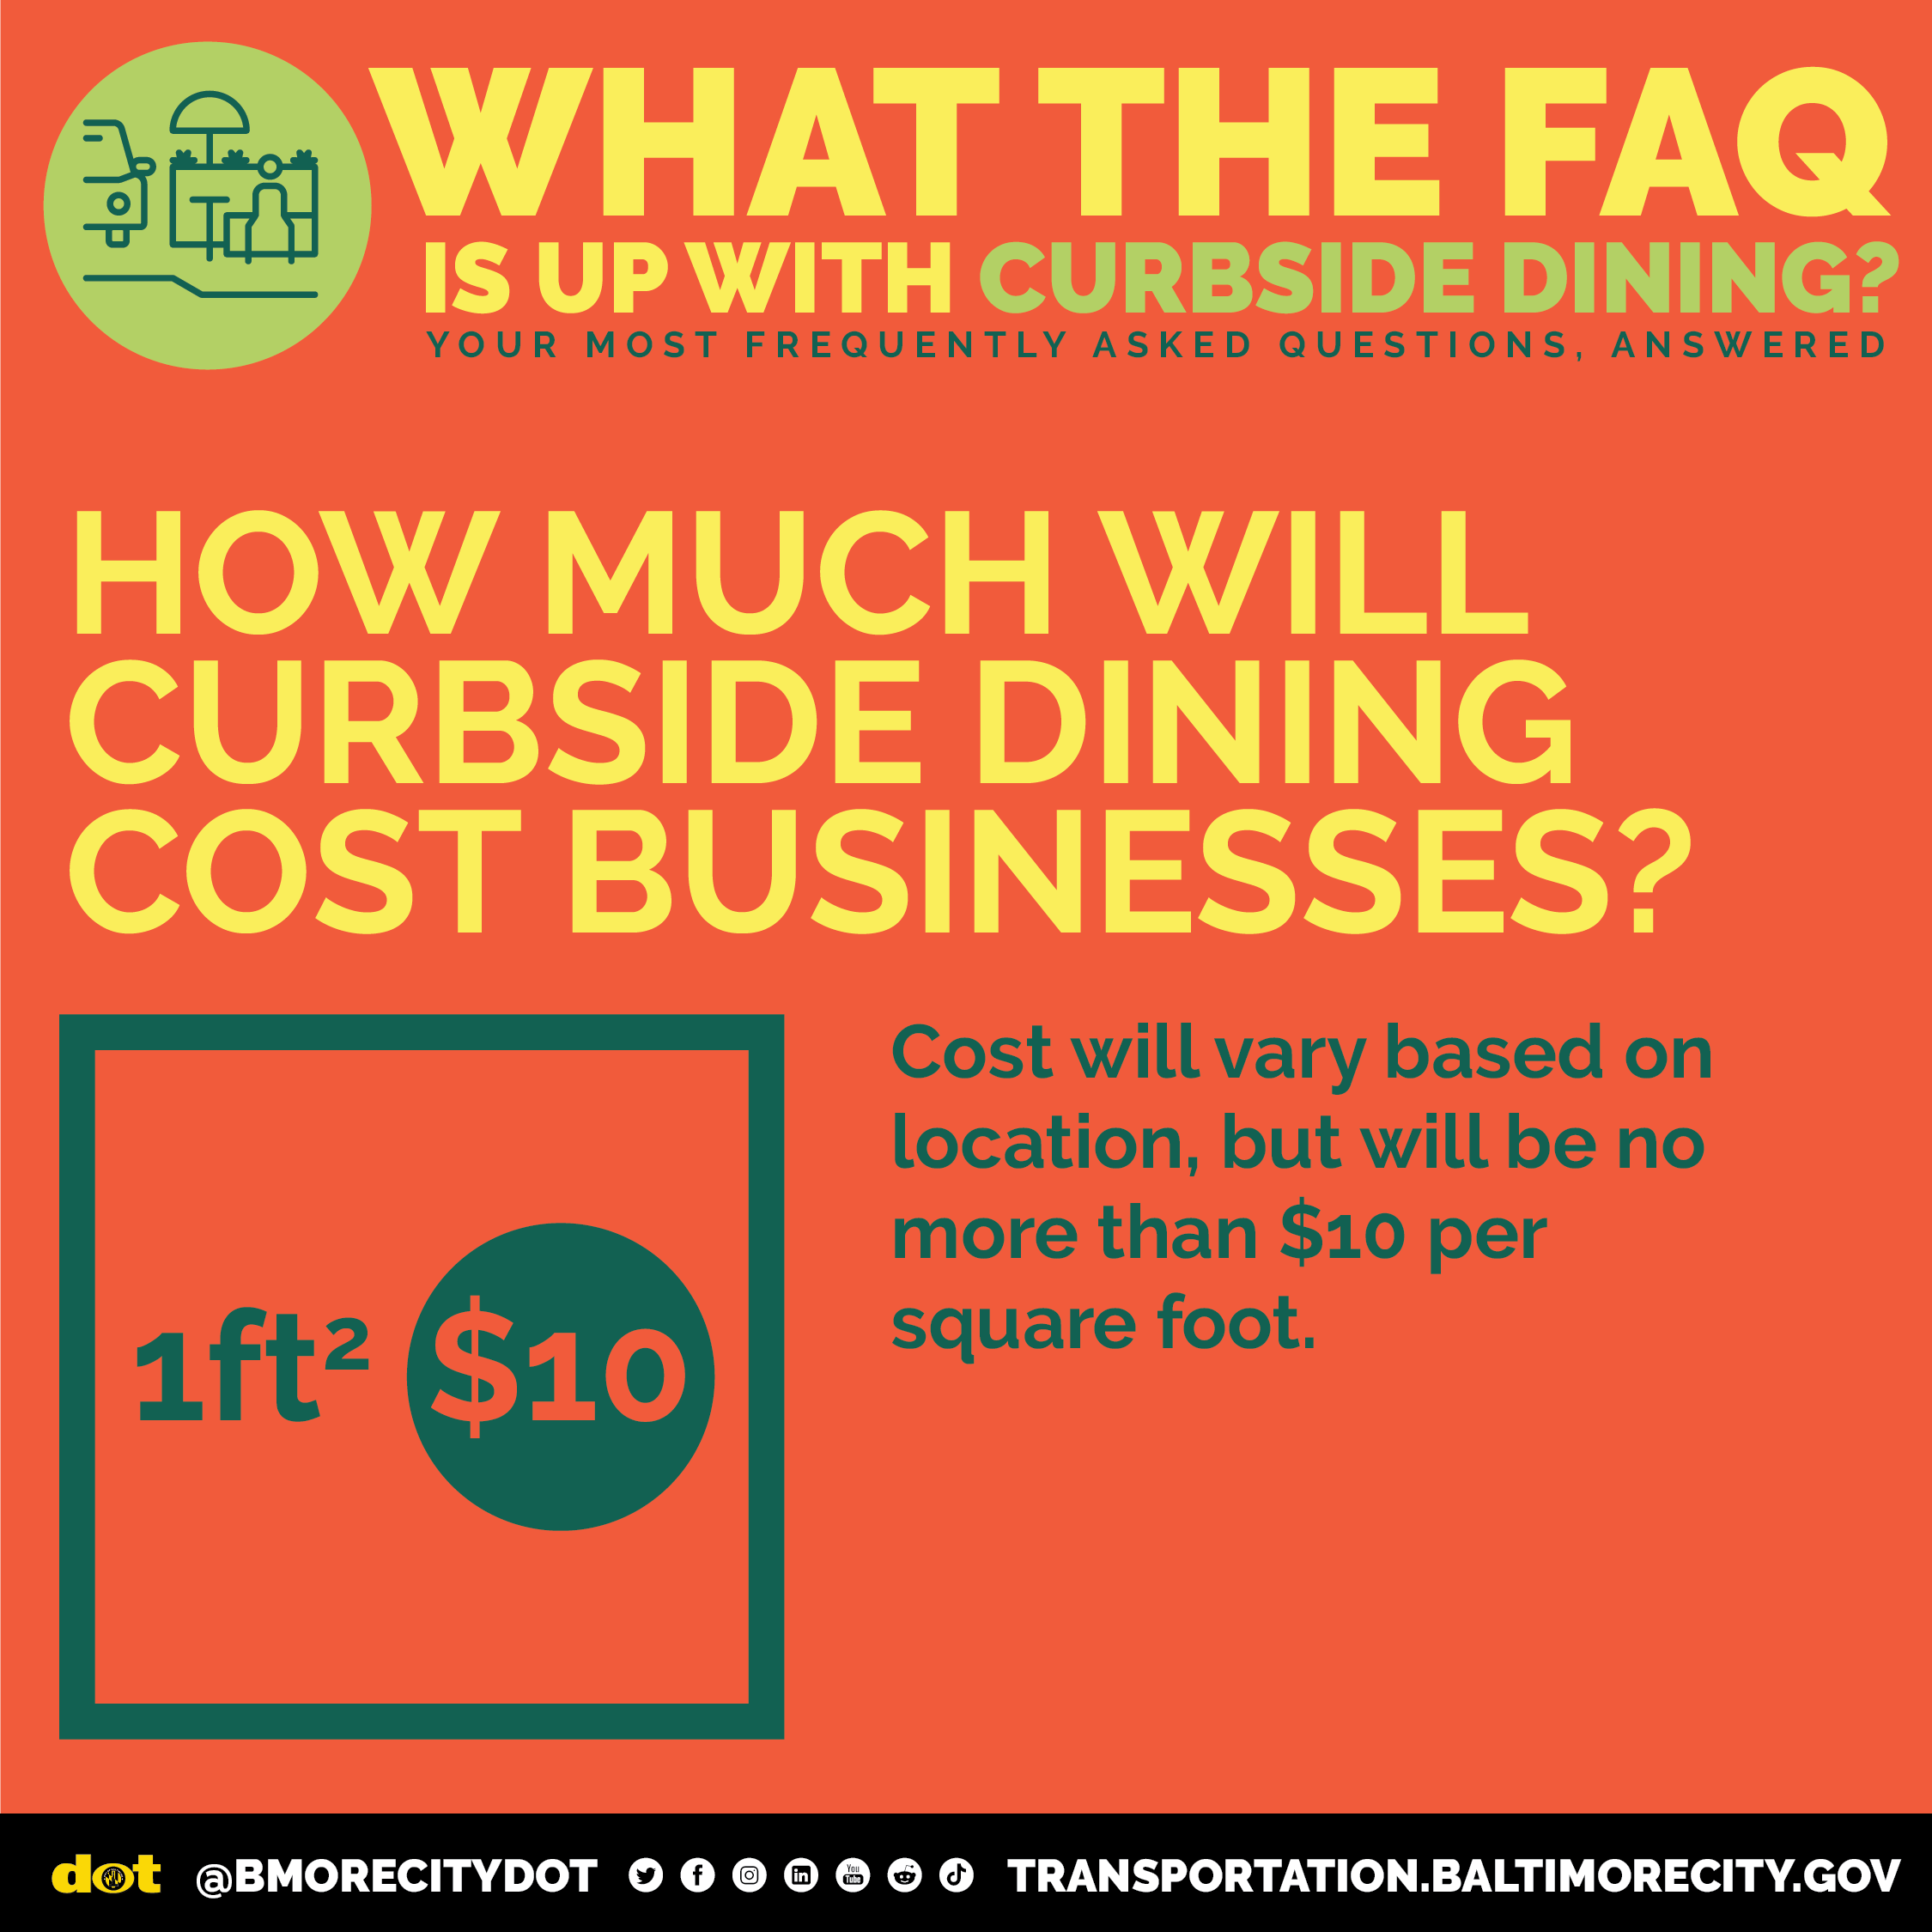 How much will curbside dining cost businesses?